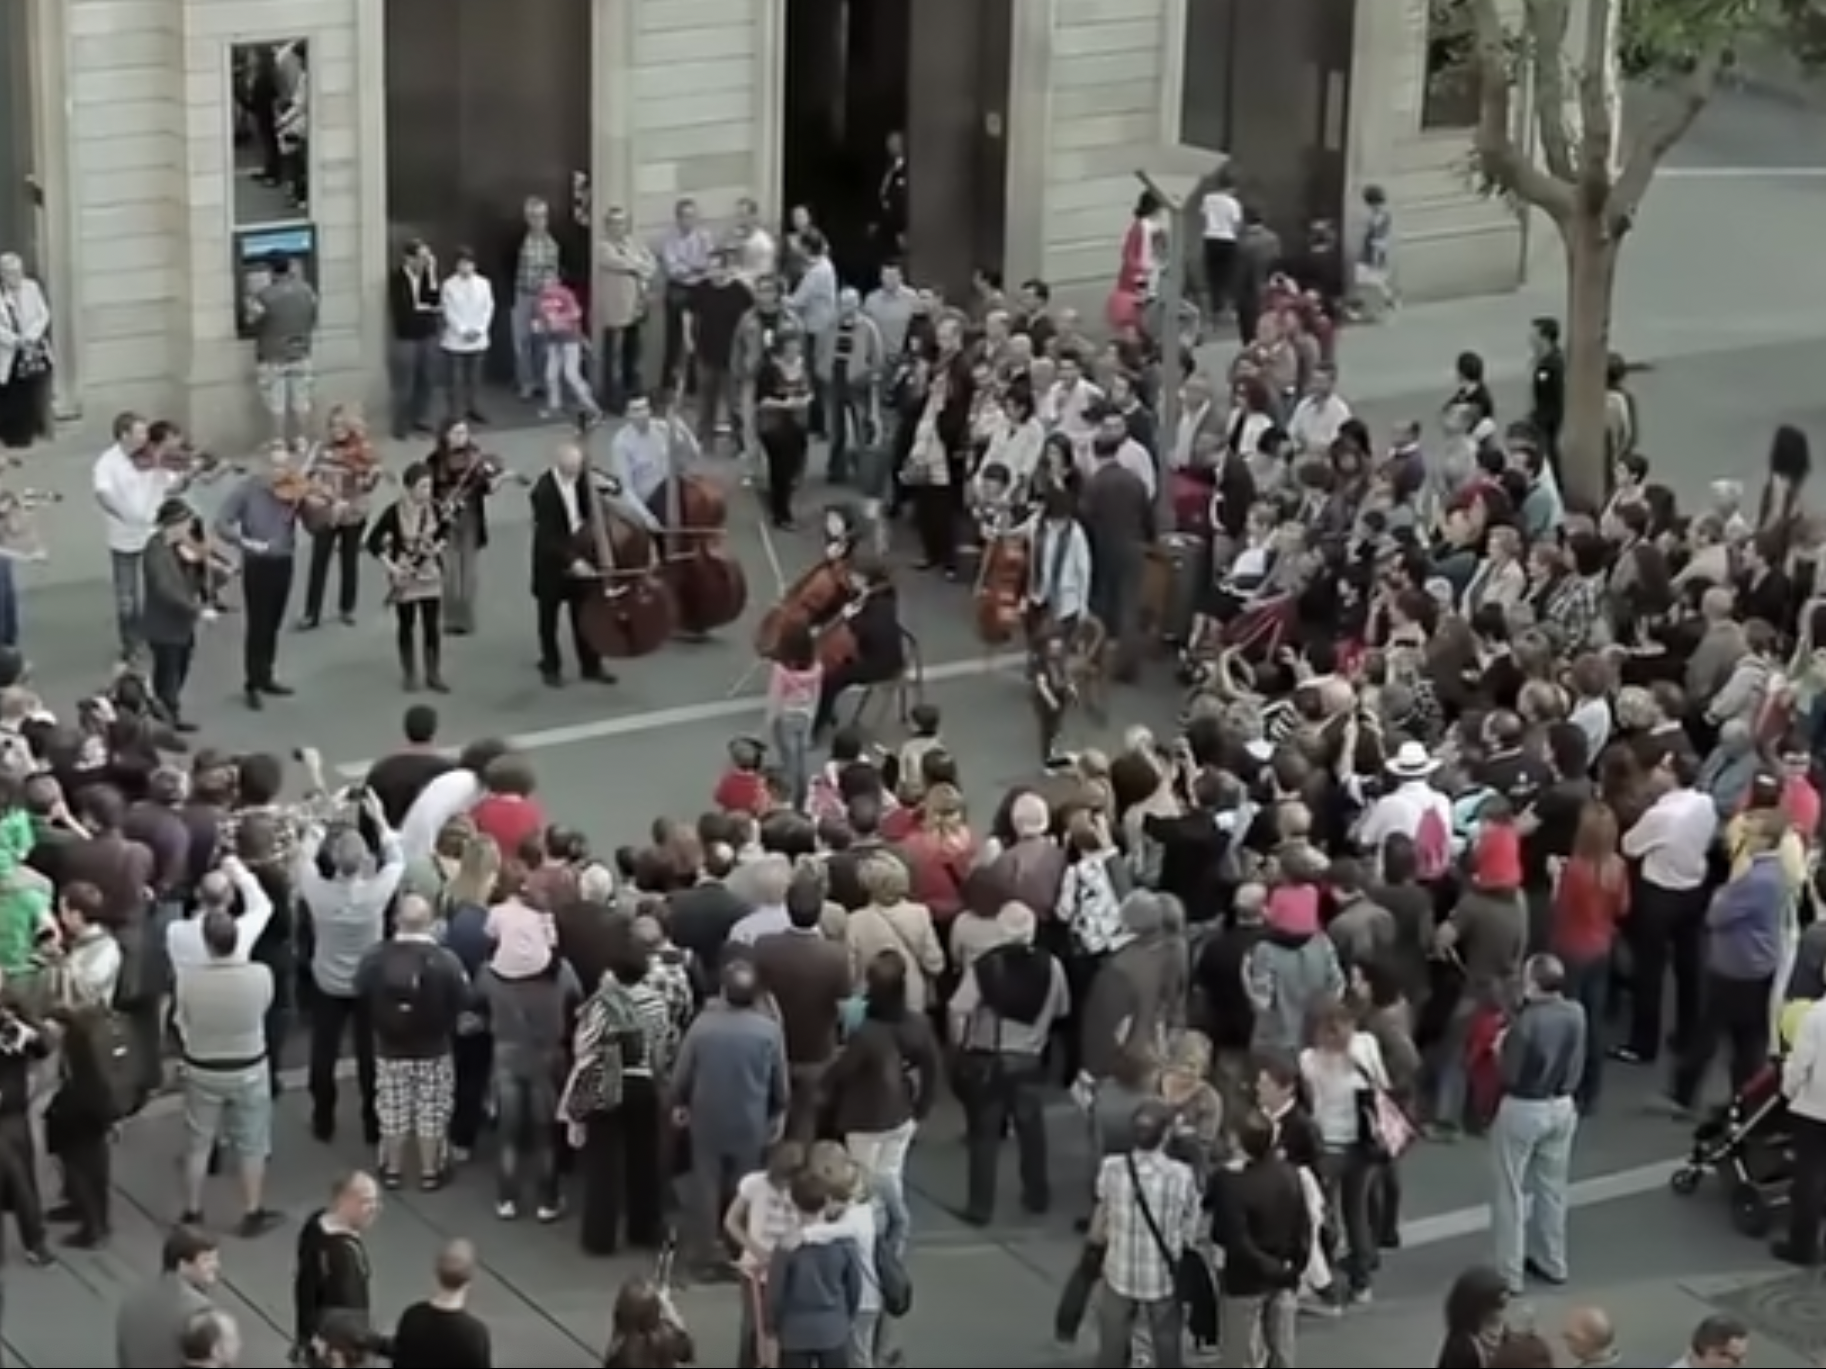 Flashmob gathered to play Beethoven's "Ode to Joy" and create community